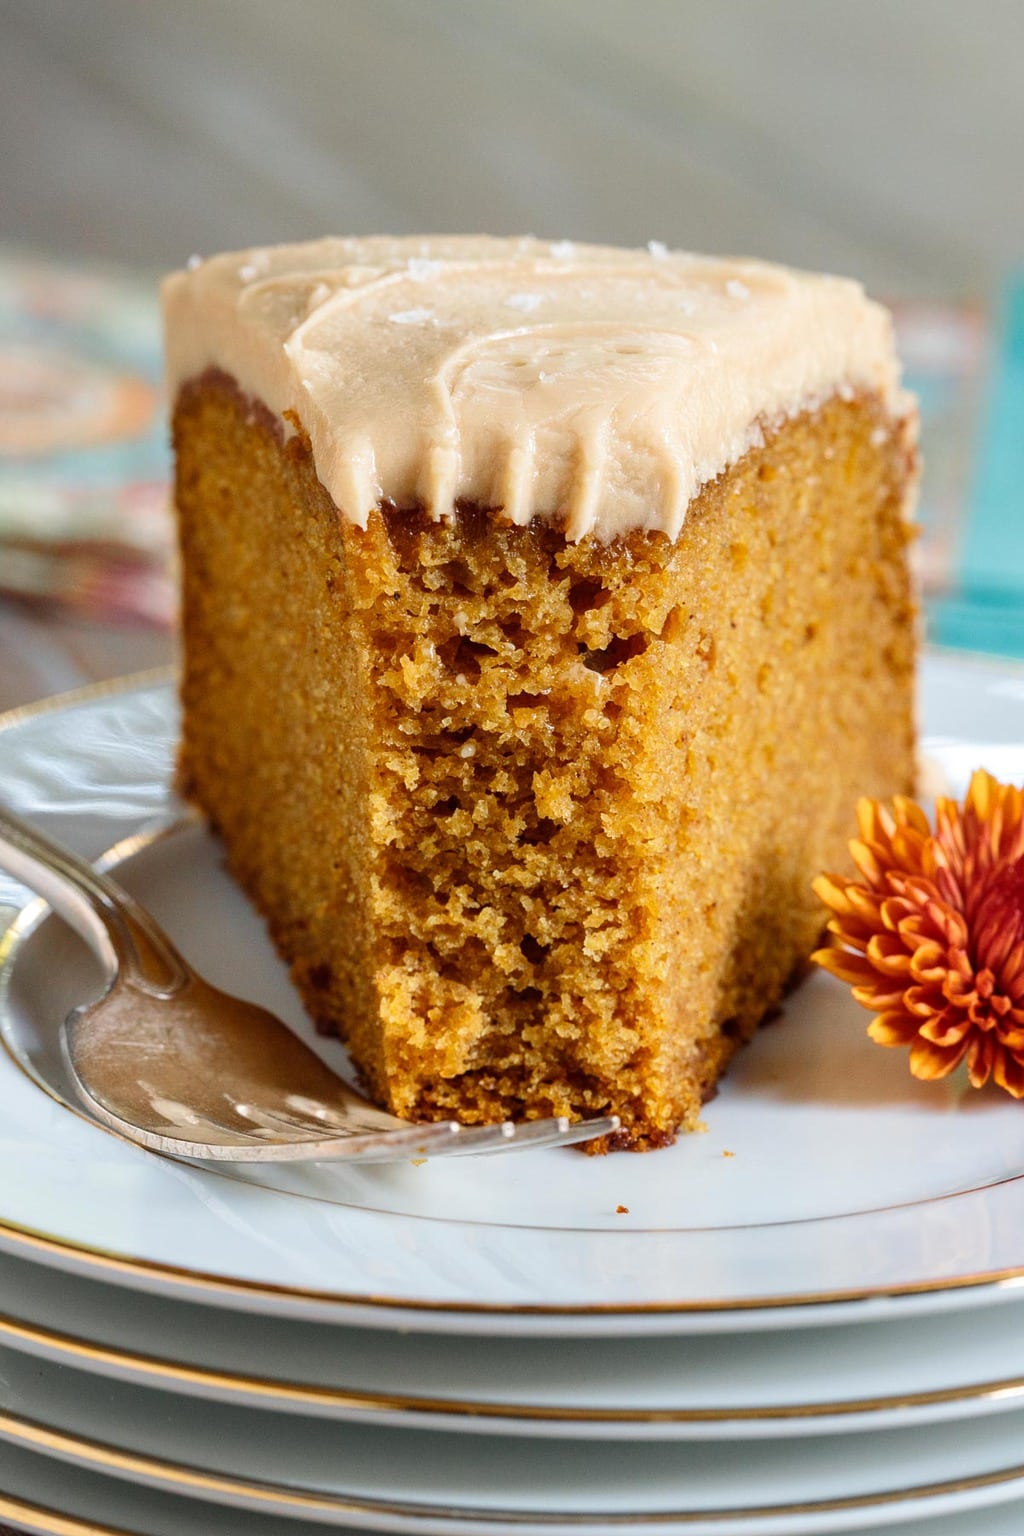 Closeup photo of a slice of One-Bowl Pumpkin Cake with Salted Caramel Icing on a white with gold trim serving plate.